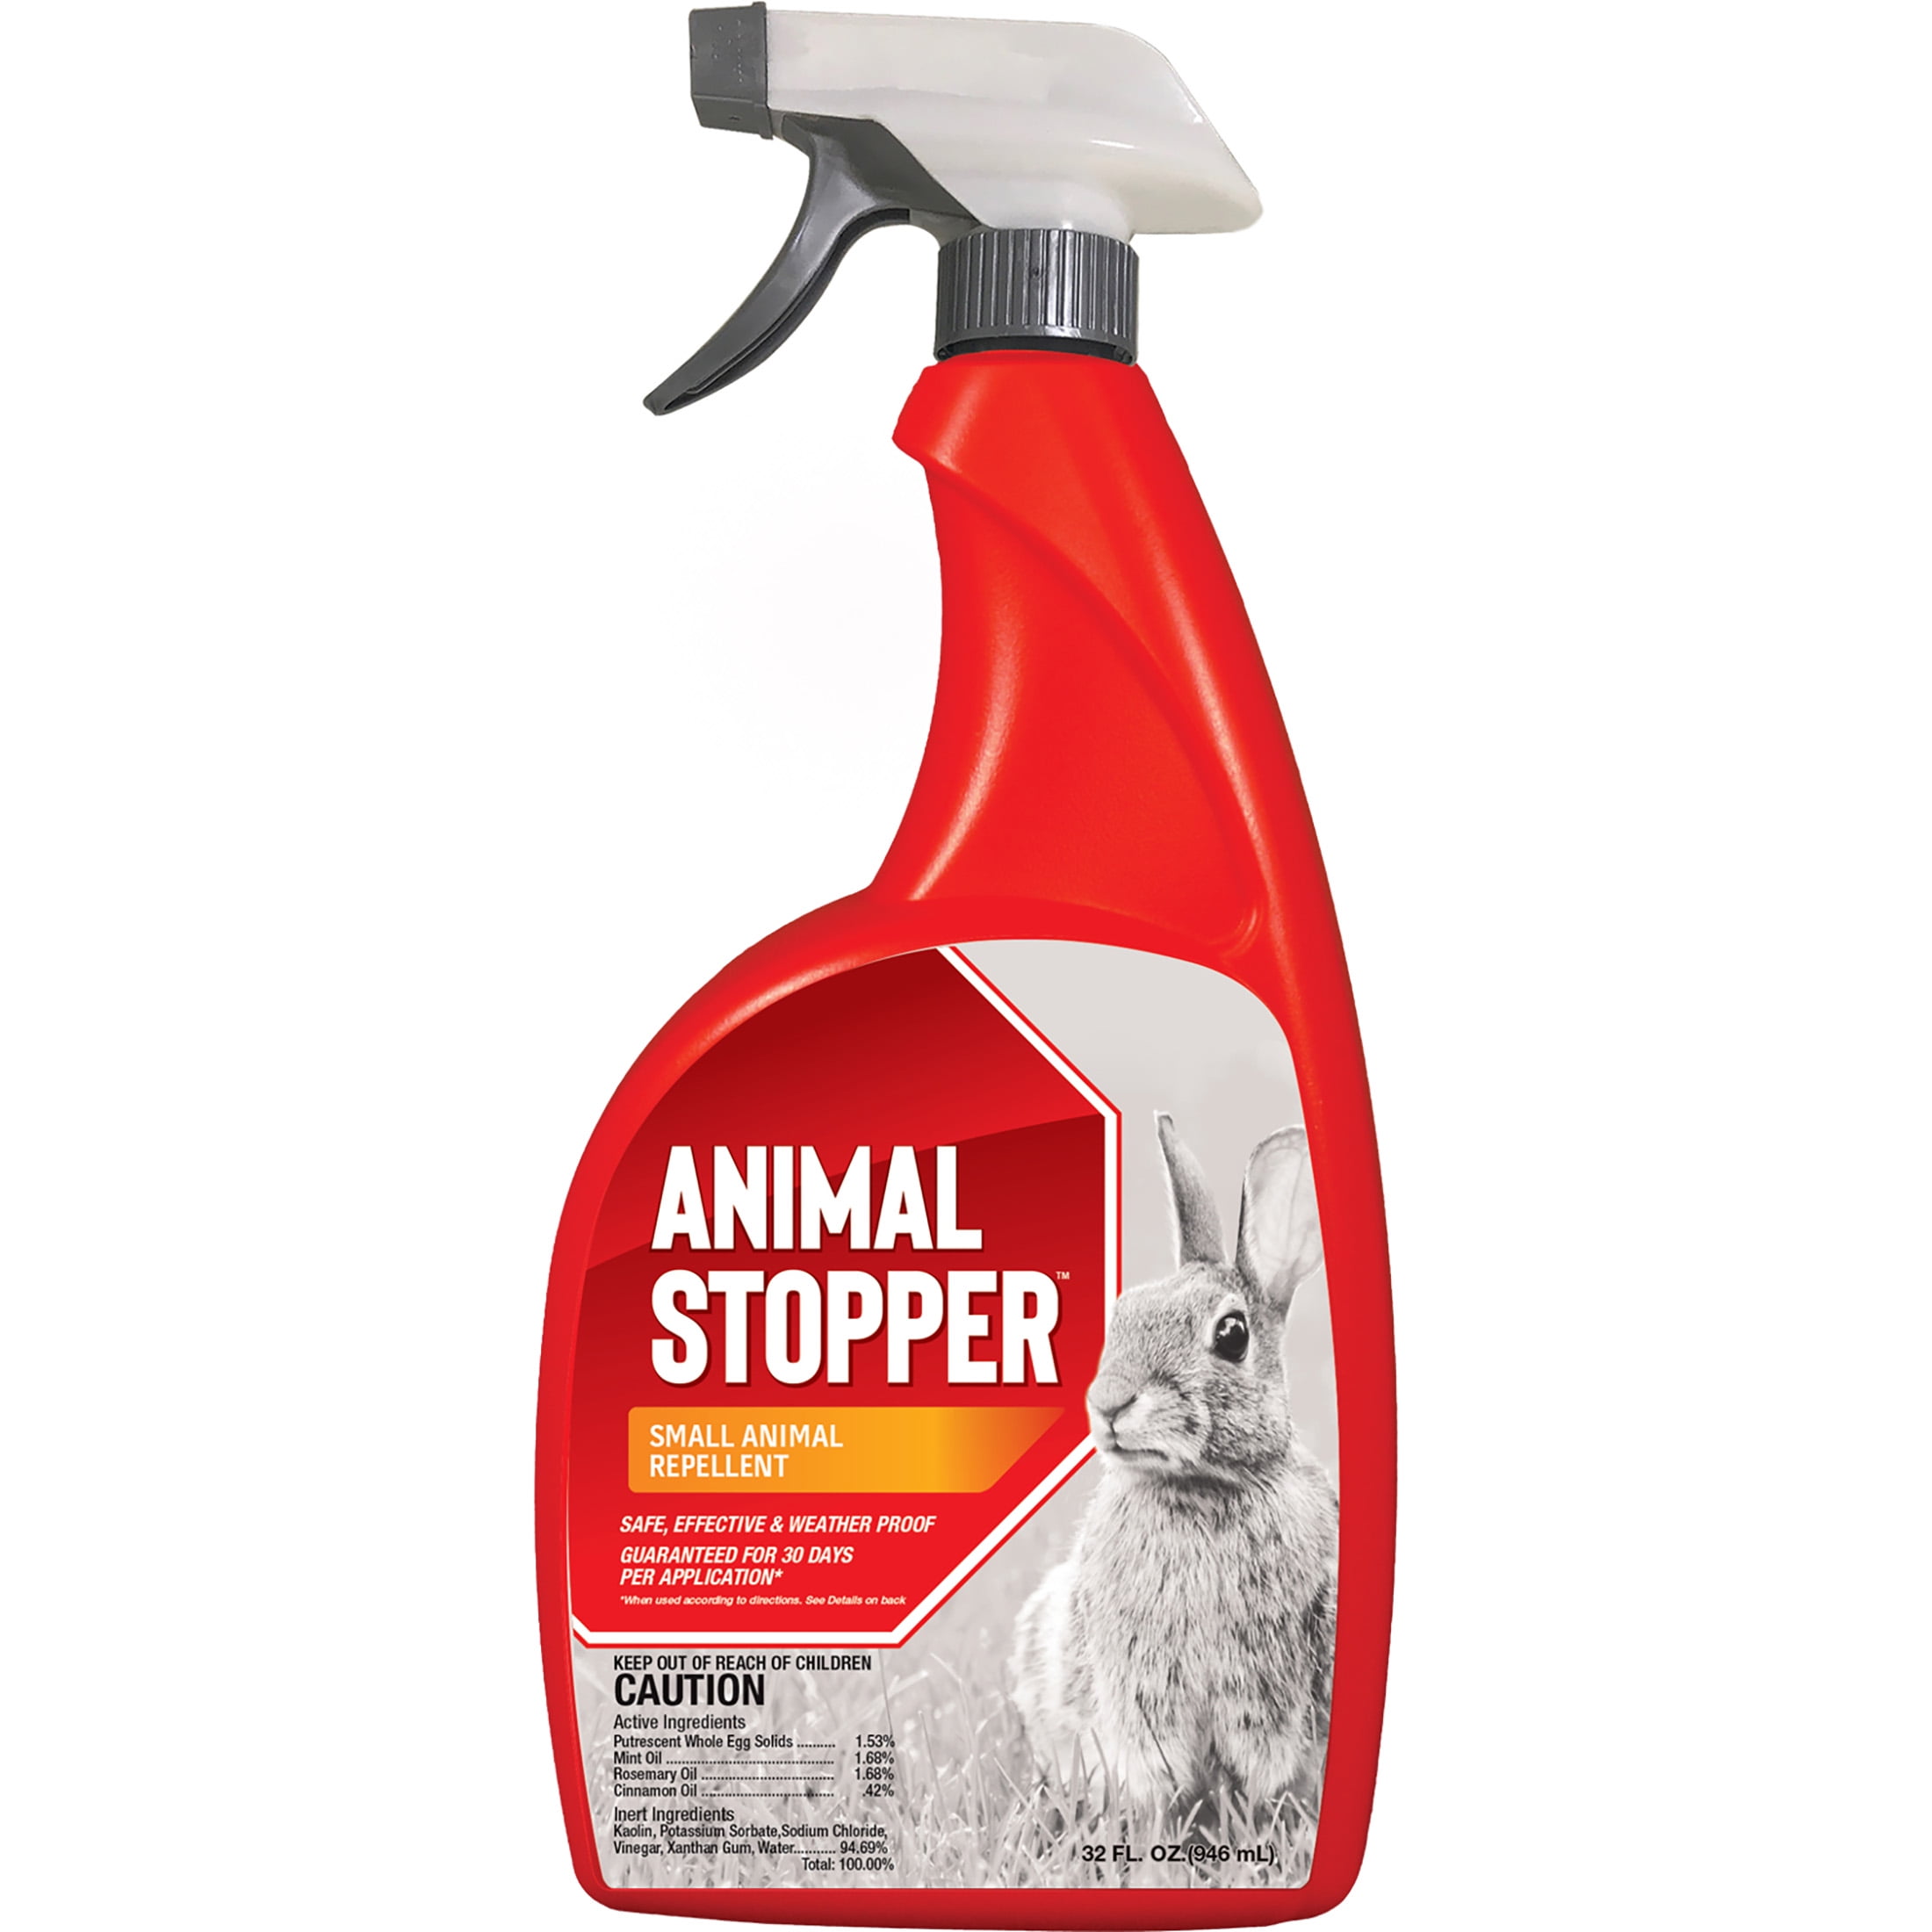 Messinas Animal Stopper Repellent for Garden Animal Repellent, Ready-to-Use 32 ounce Trigger Bottle